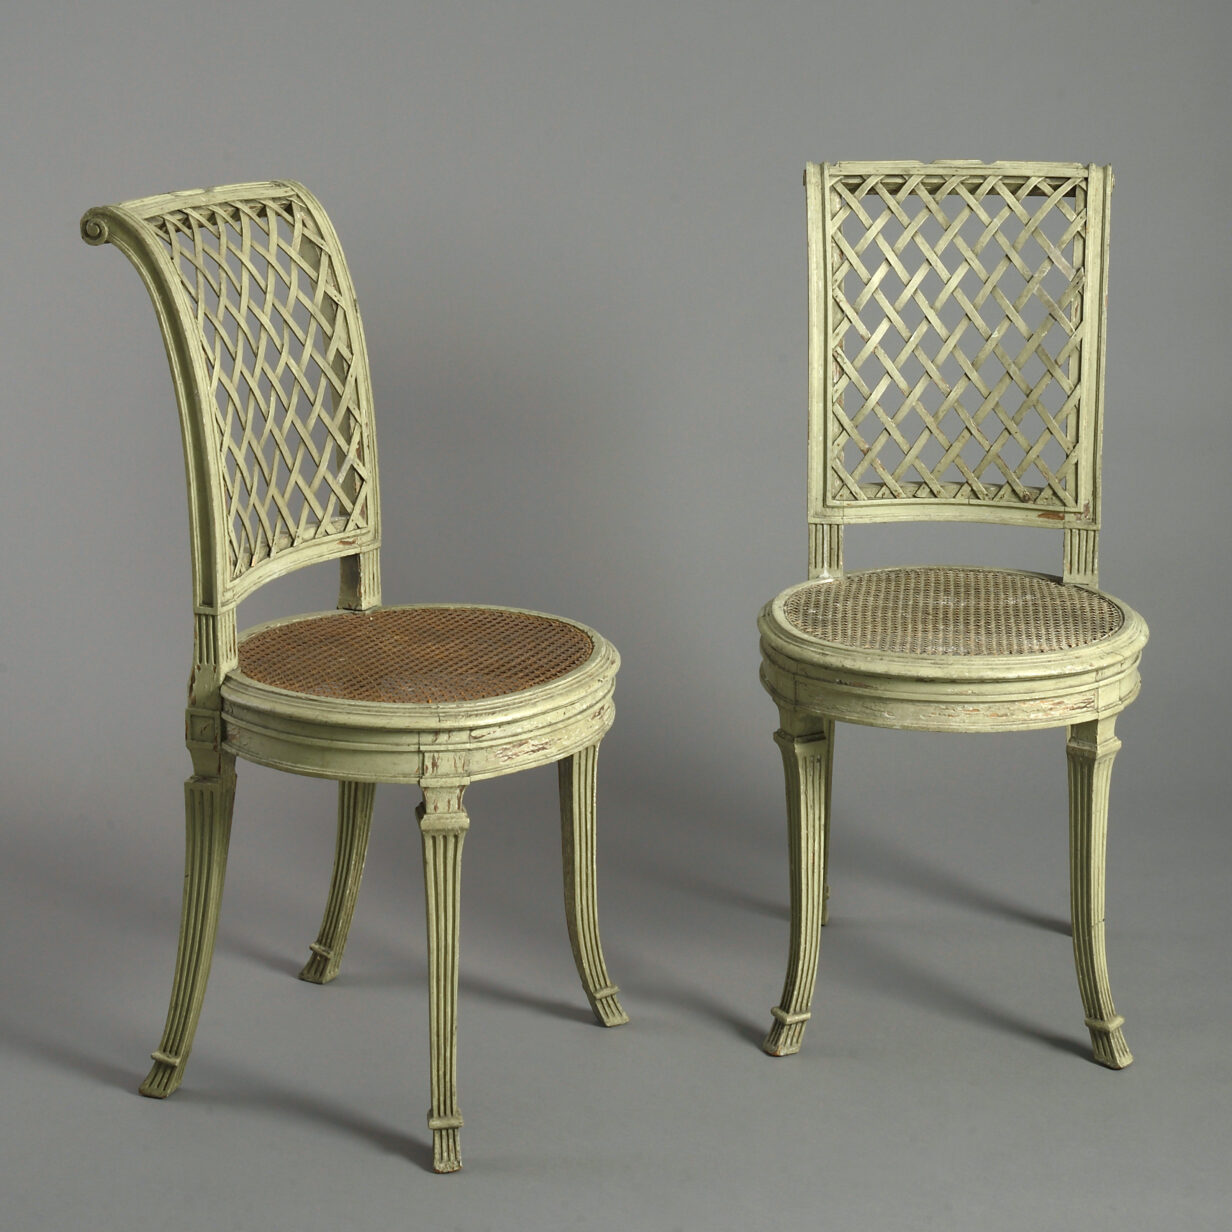 Pair of 19th century painted side chairs in the louis xvi manner